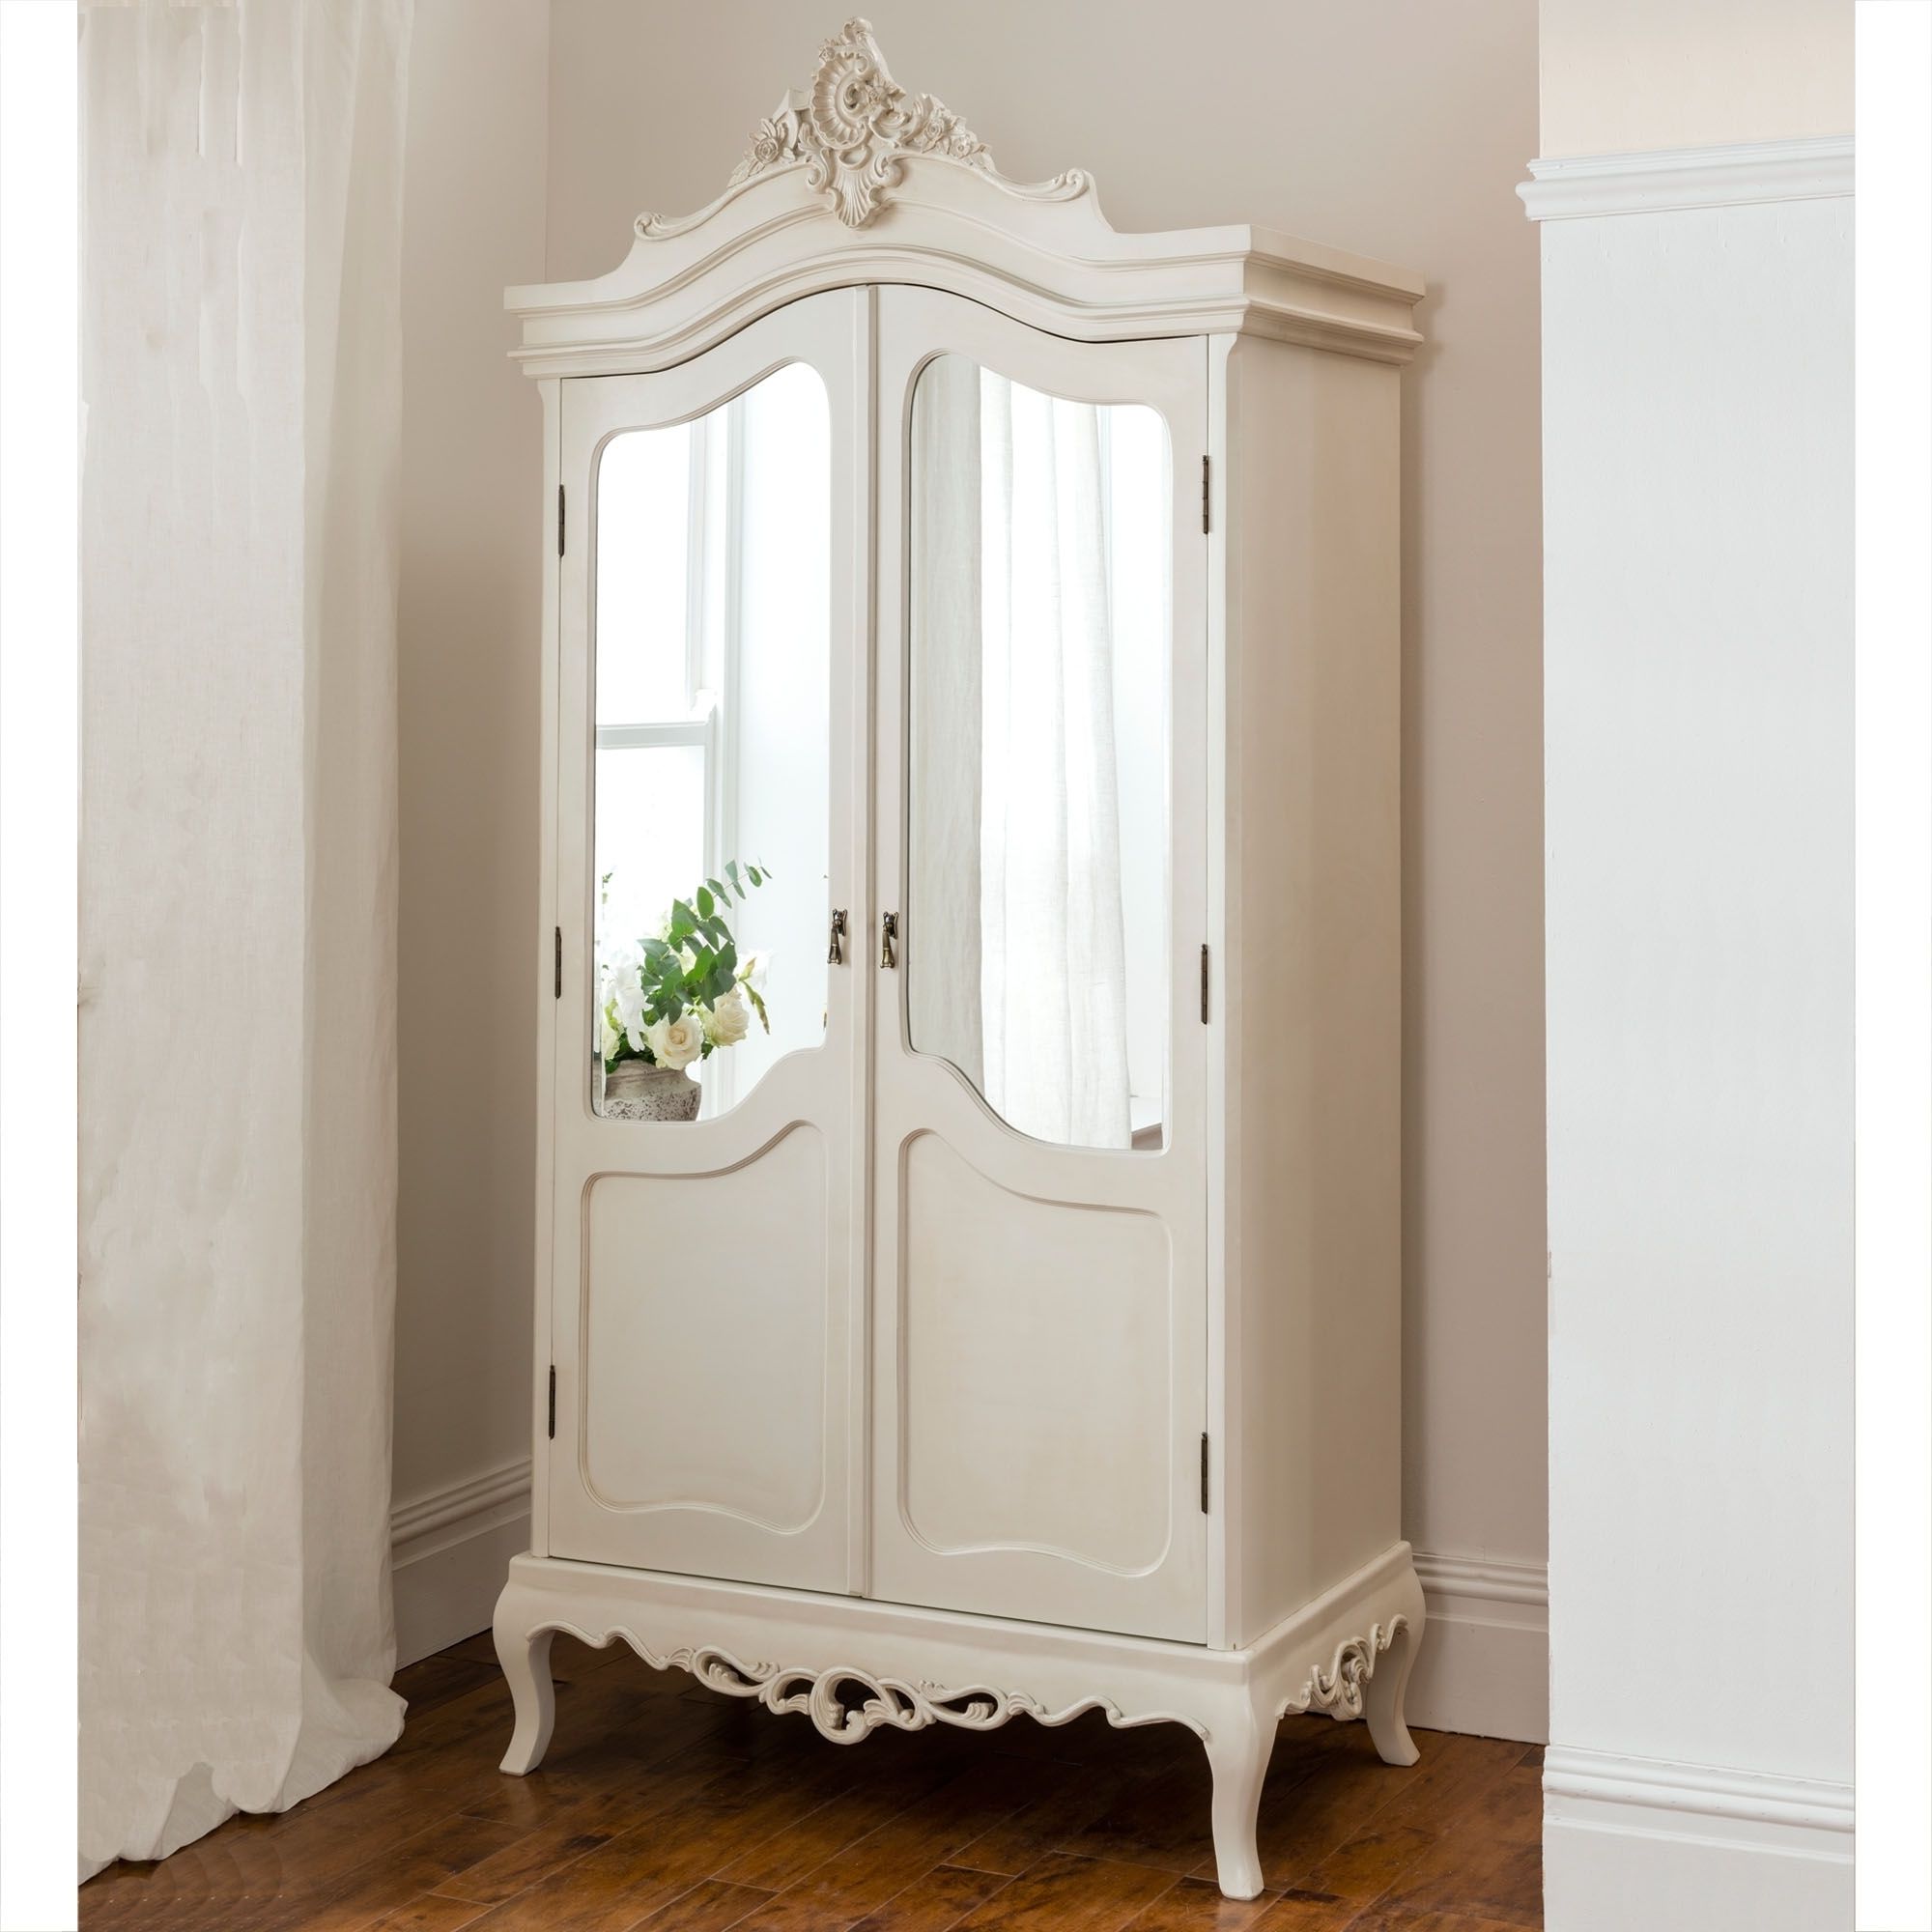 Annaelle Antique French Wardrobe With Regard To French White Wardrobes (View 6 of 20)